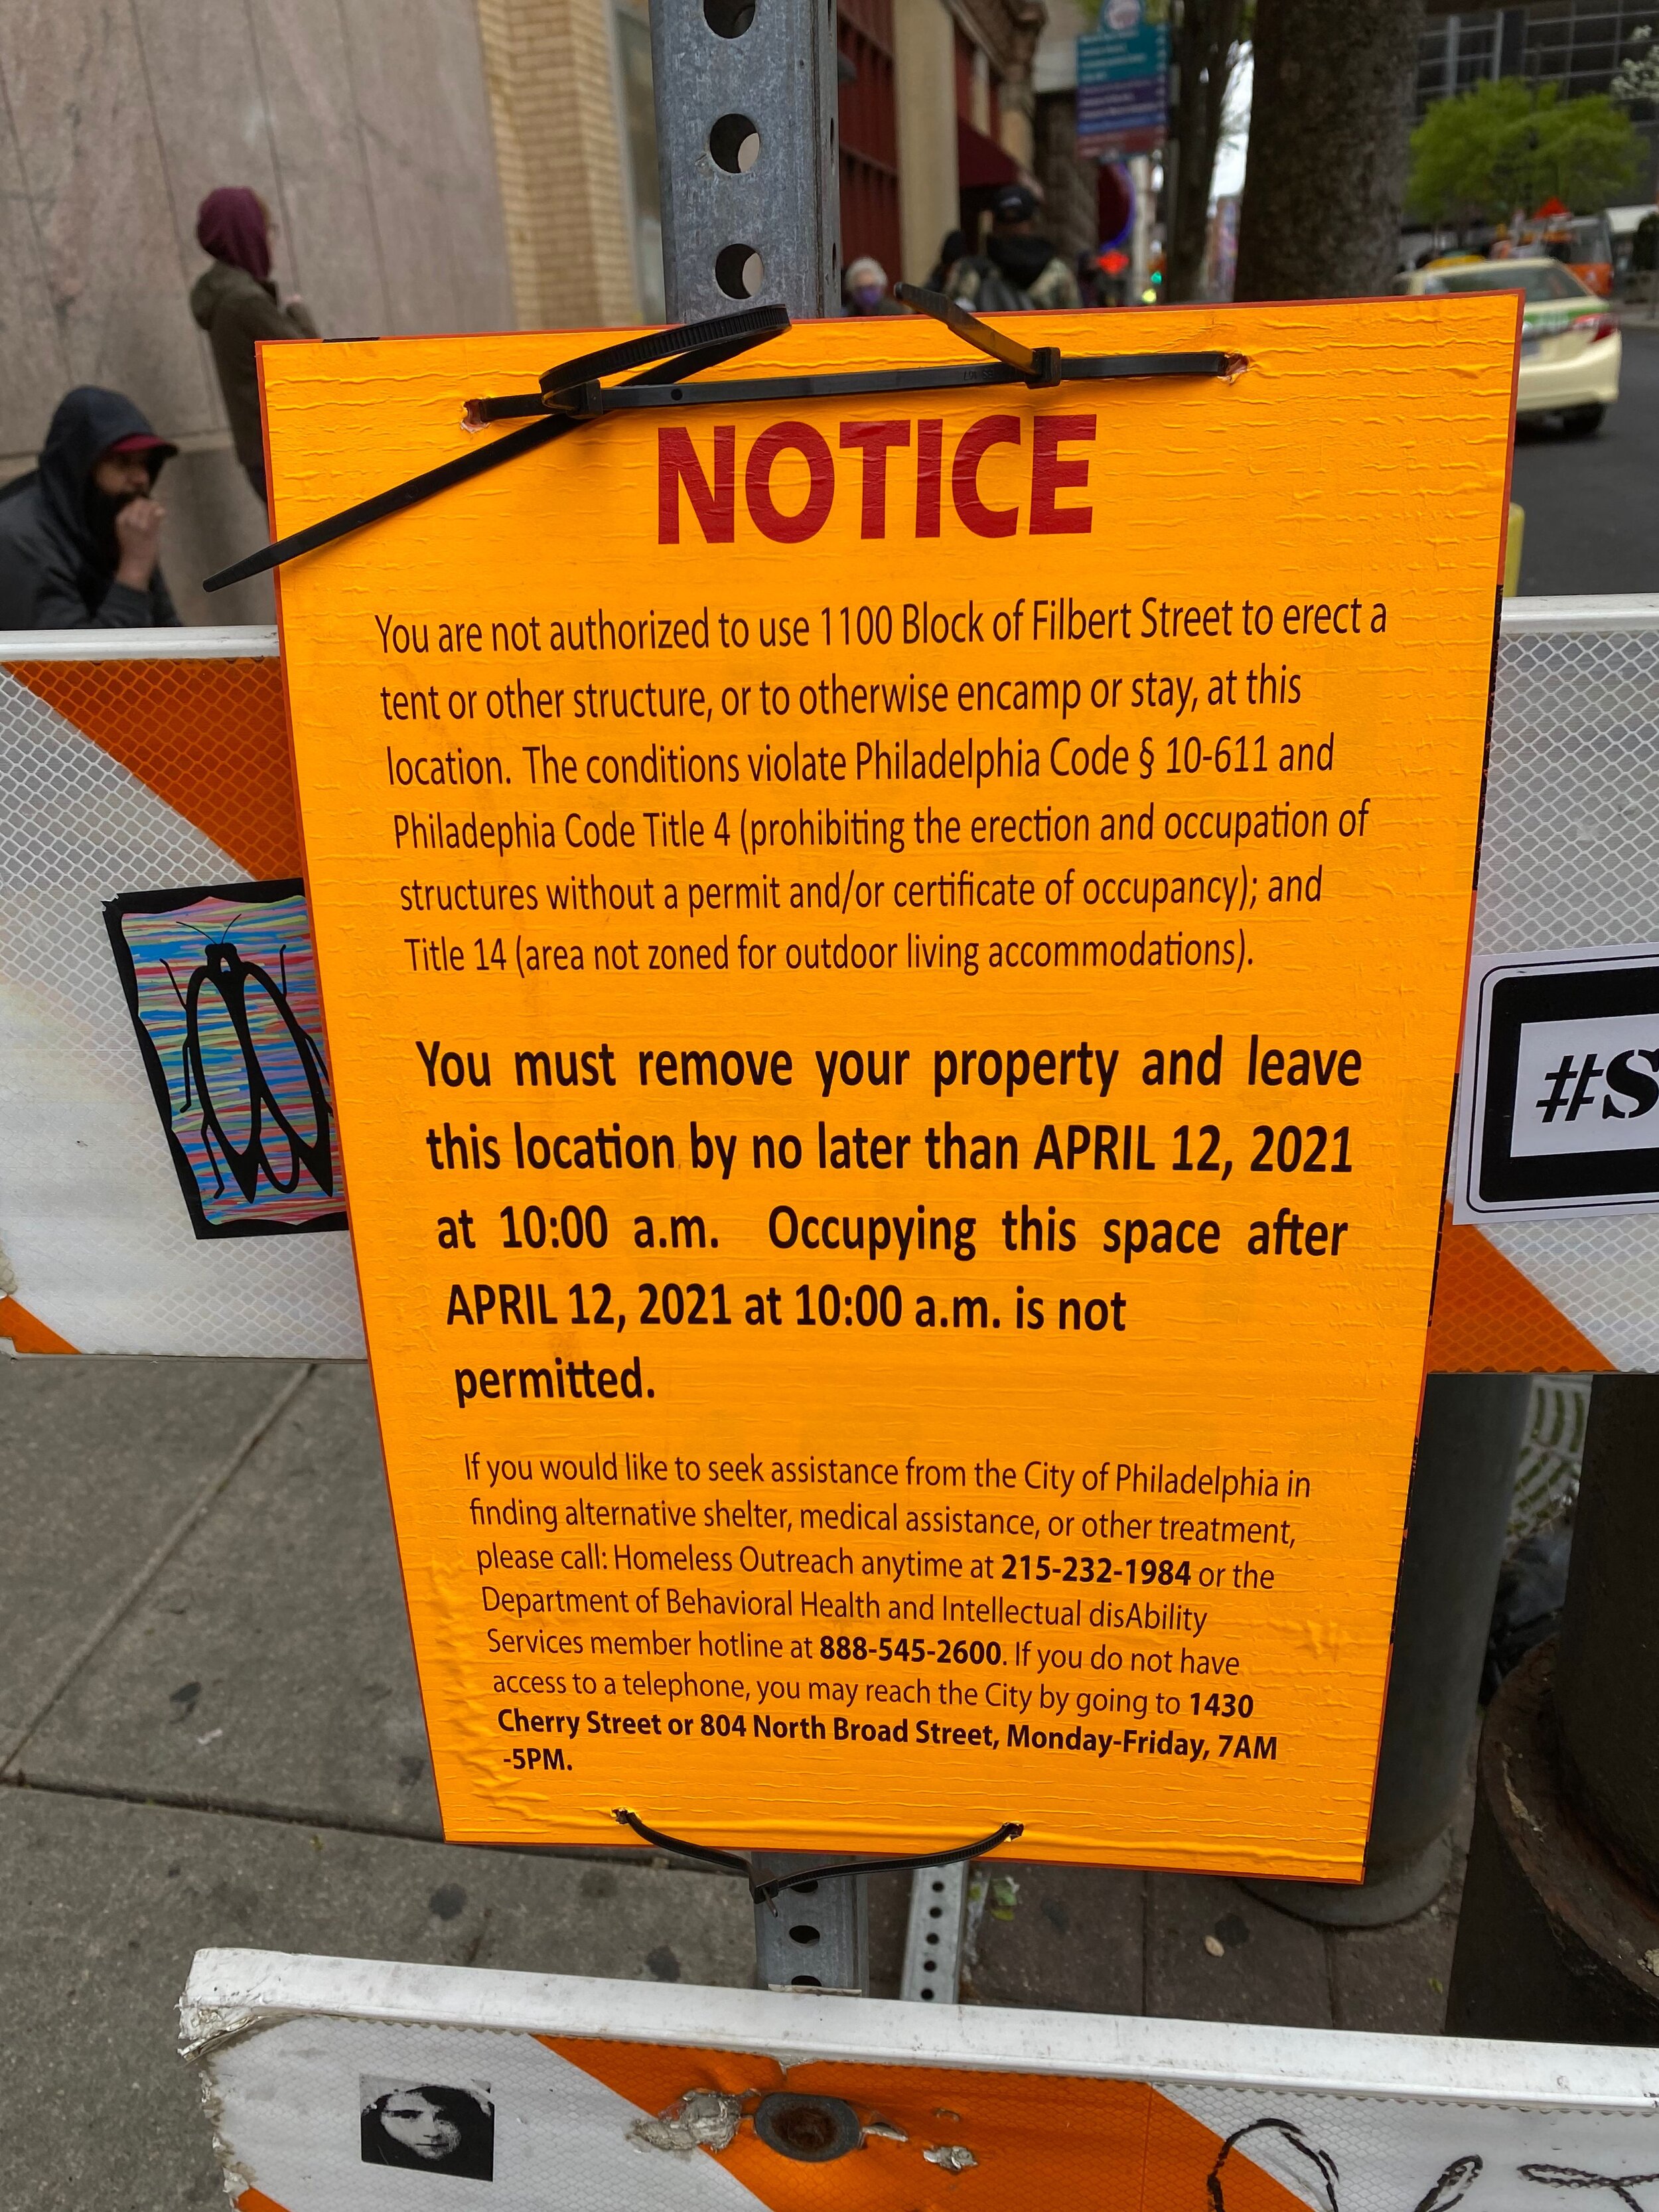 Posted notice to remove property from the location